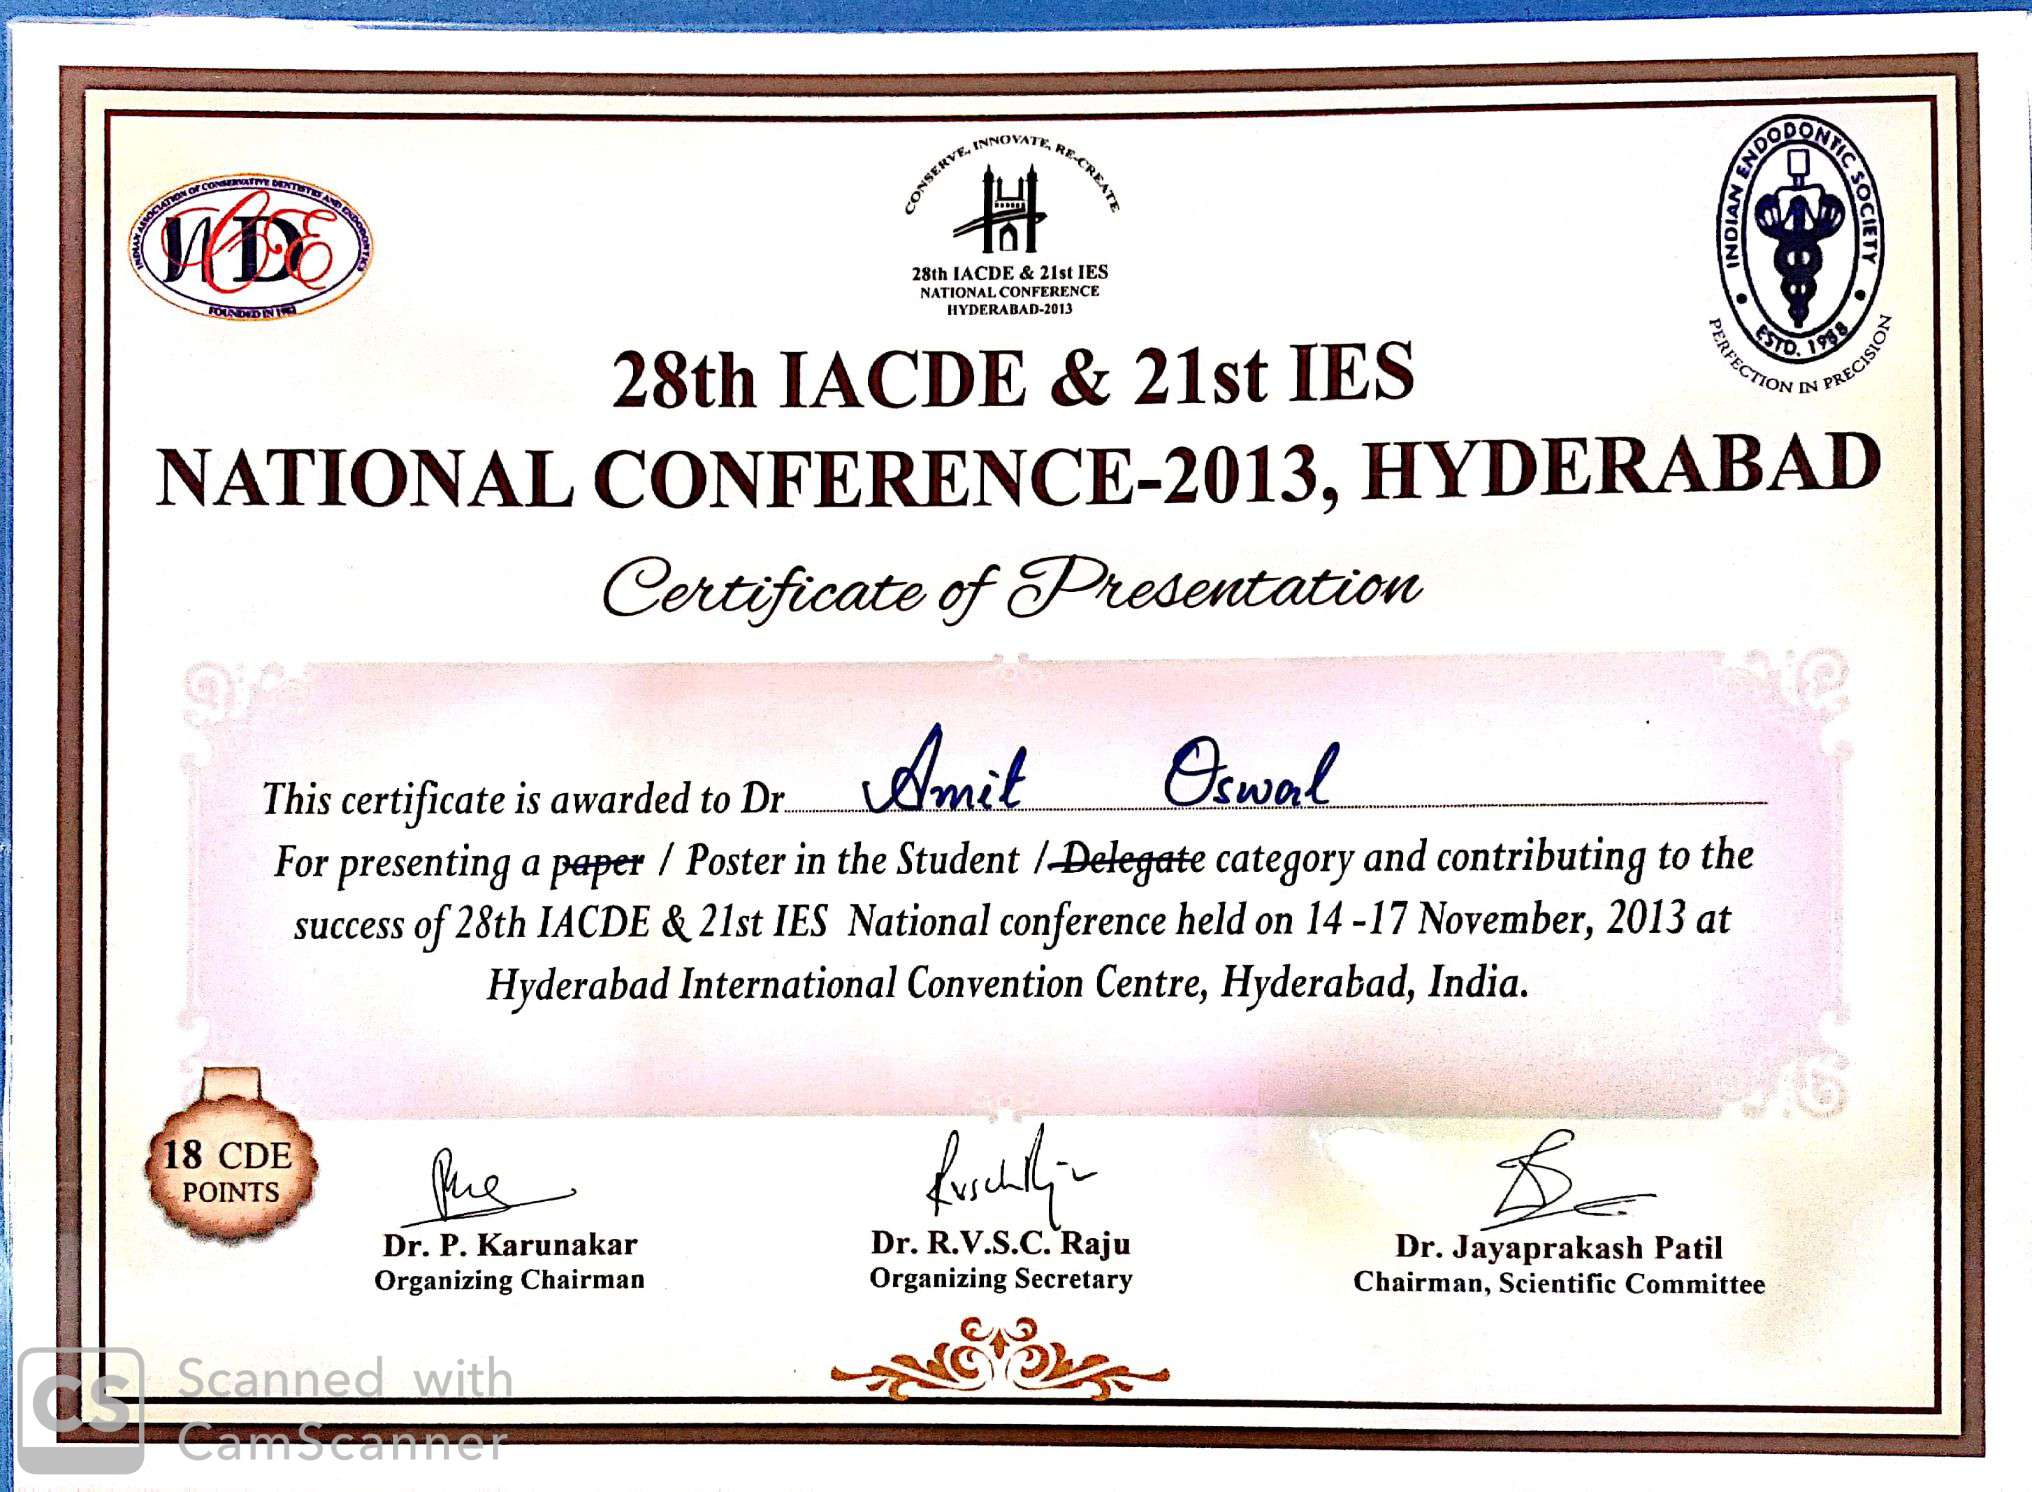 Odental contribution at 28th IACDE & 21st IES national conference